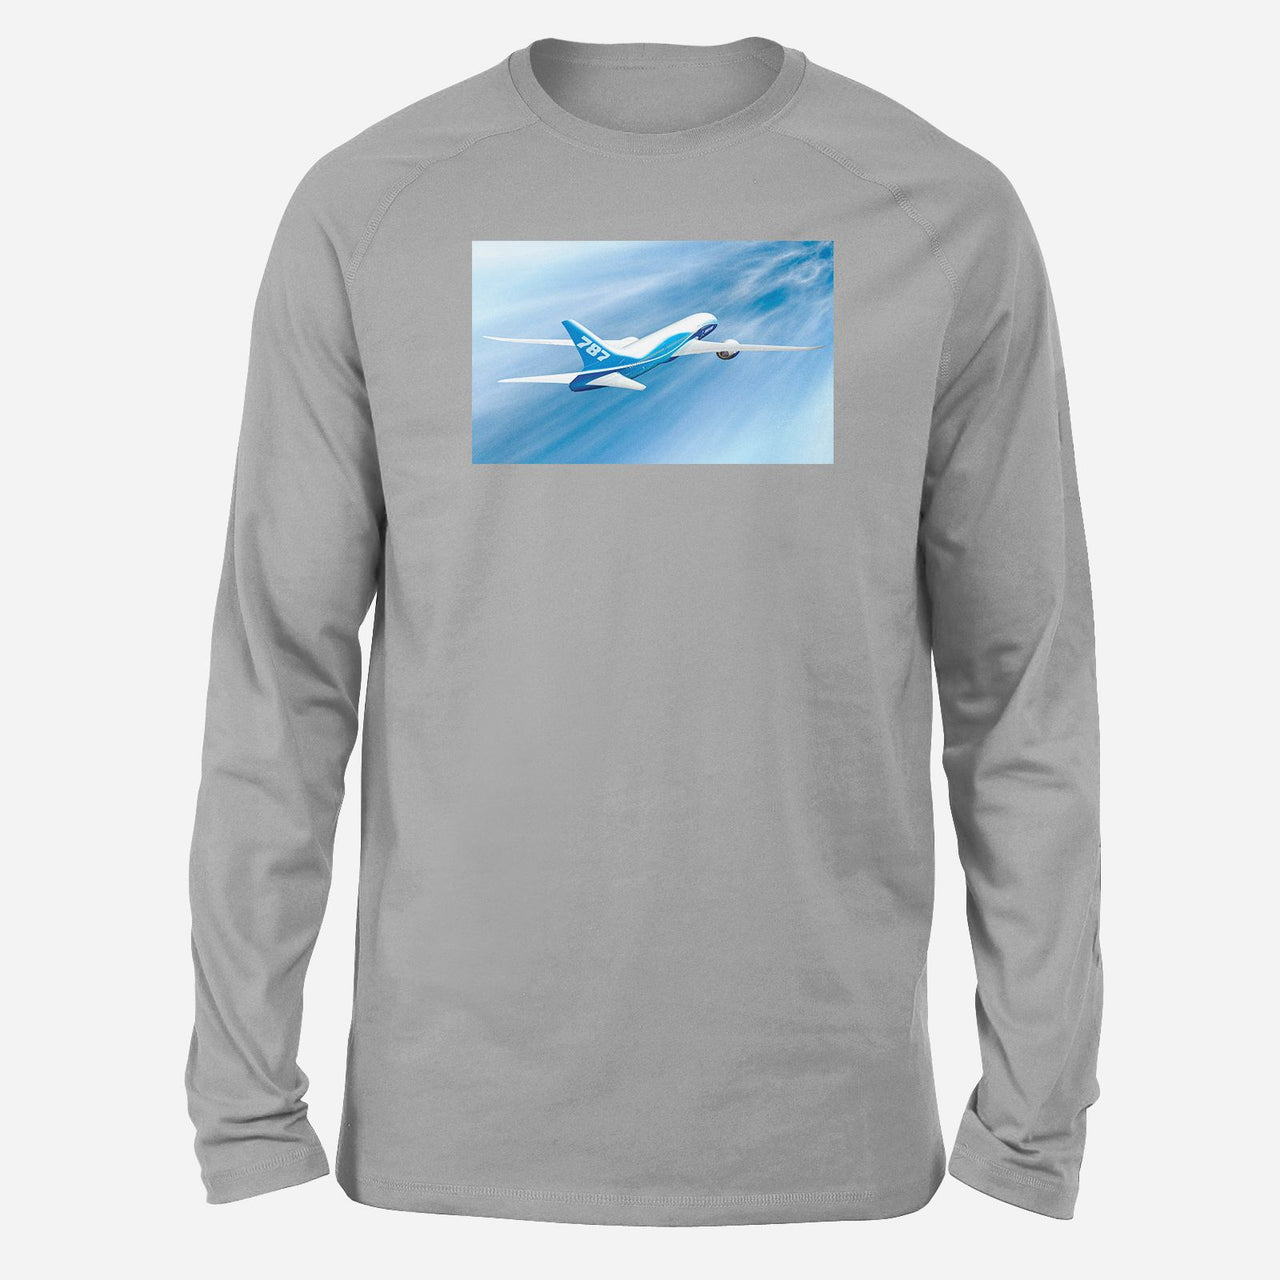 Beautiful Painting of Boeing 787 Dreamliner Designed Long-Sleeve T-Shirts